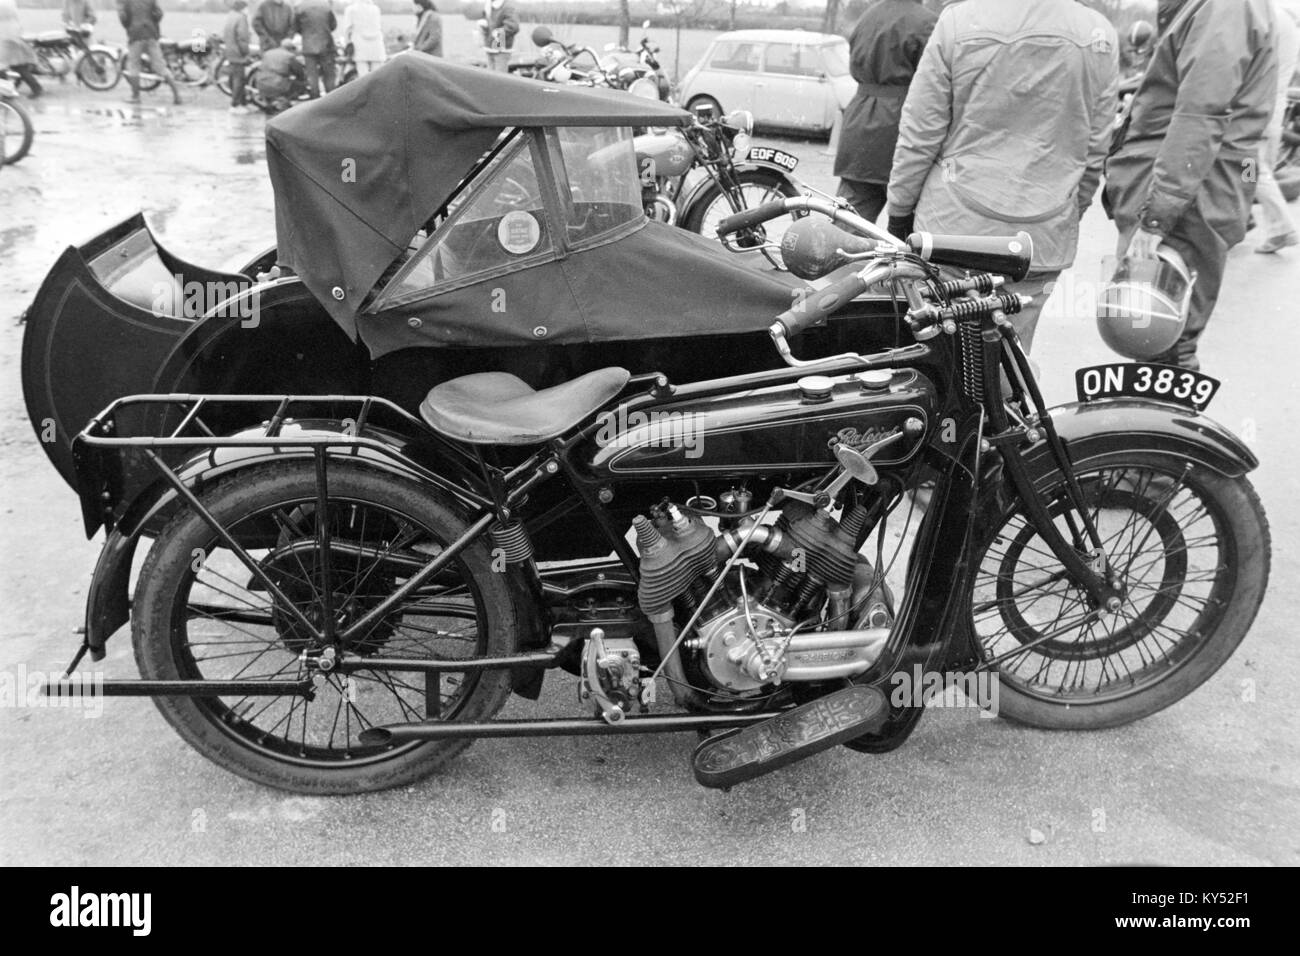 Raleigh V twin vintage motorcycle Stock Photo